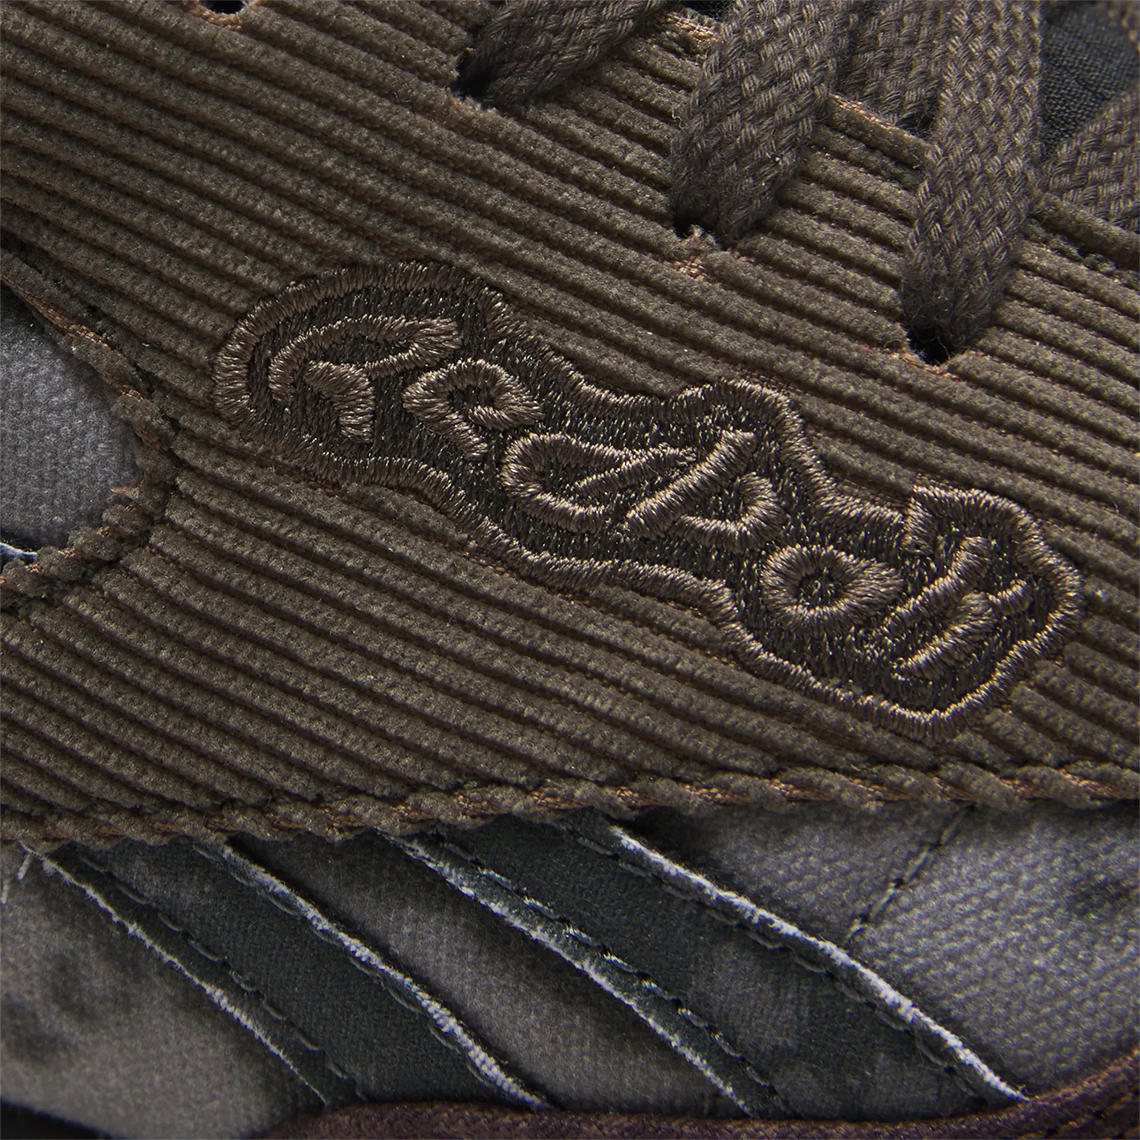 Reebok has been cranking out dope versions of the Classic Leather see 420 Ie4104 1